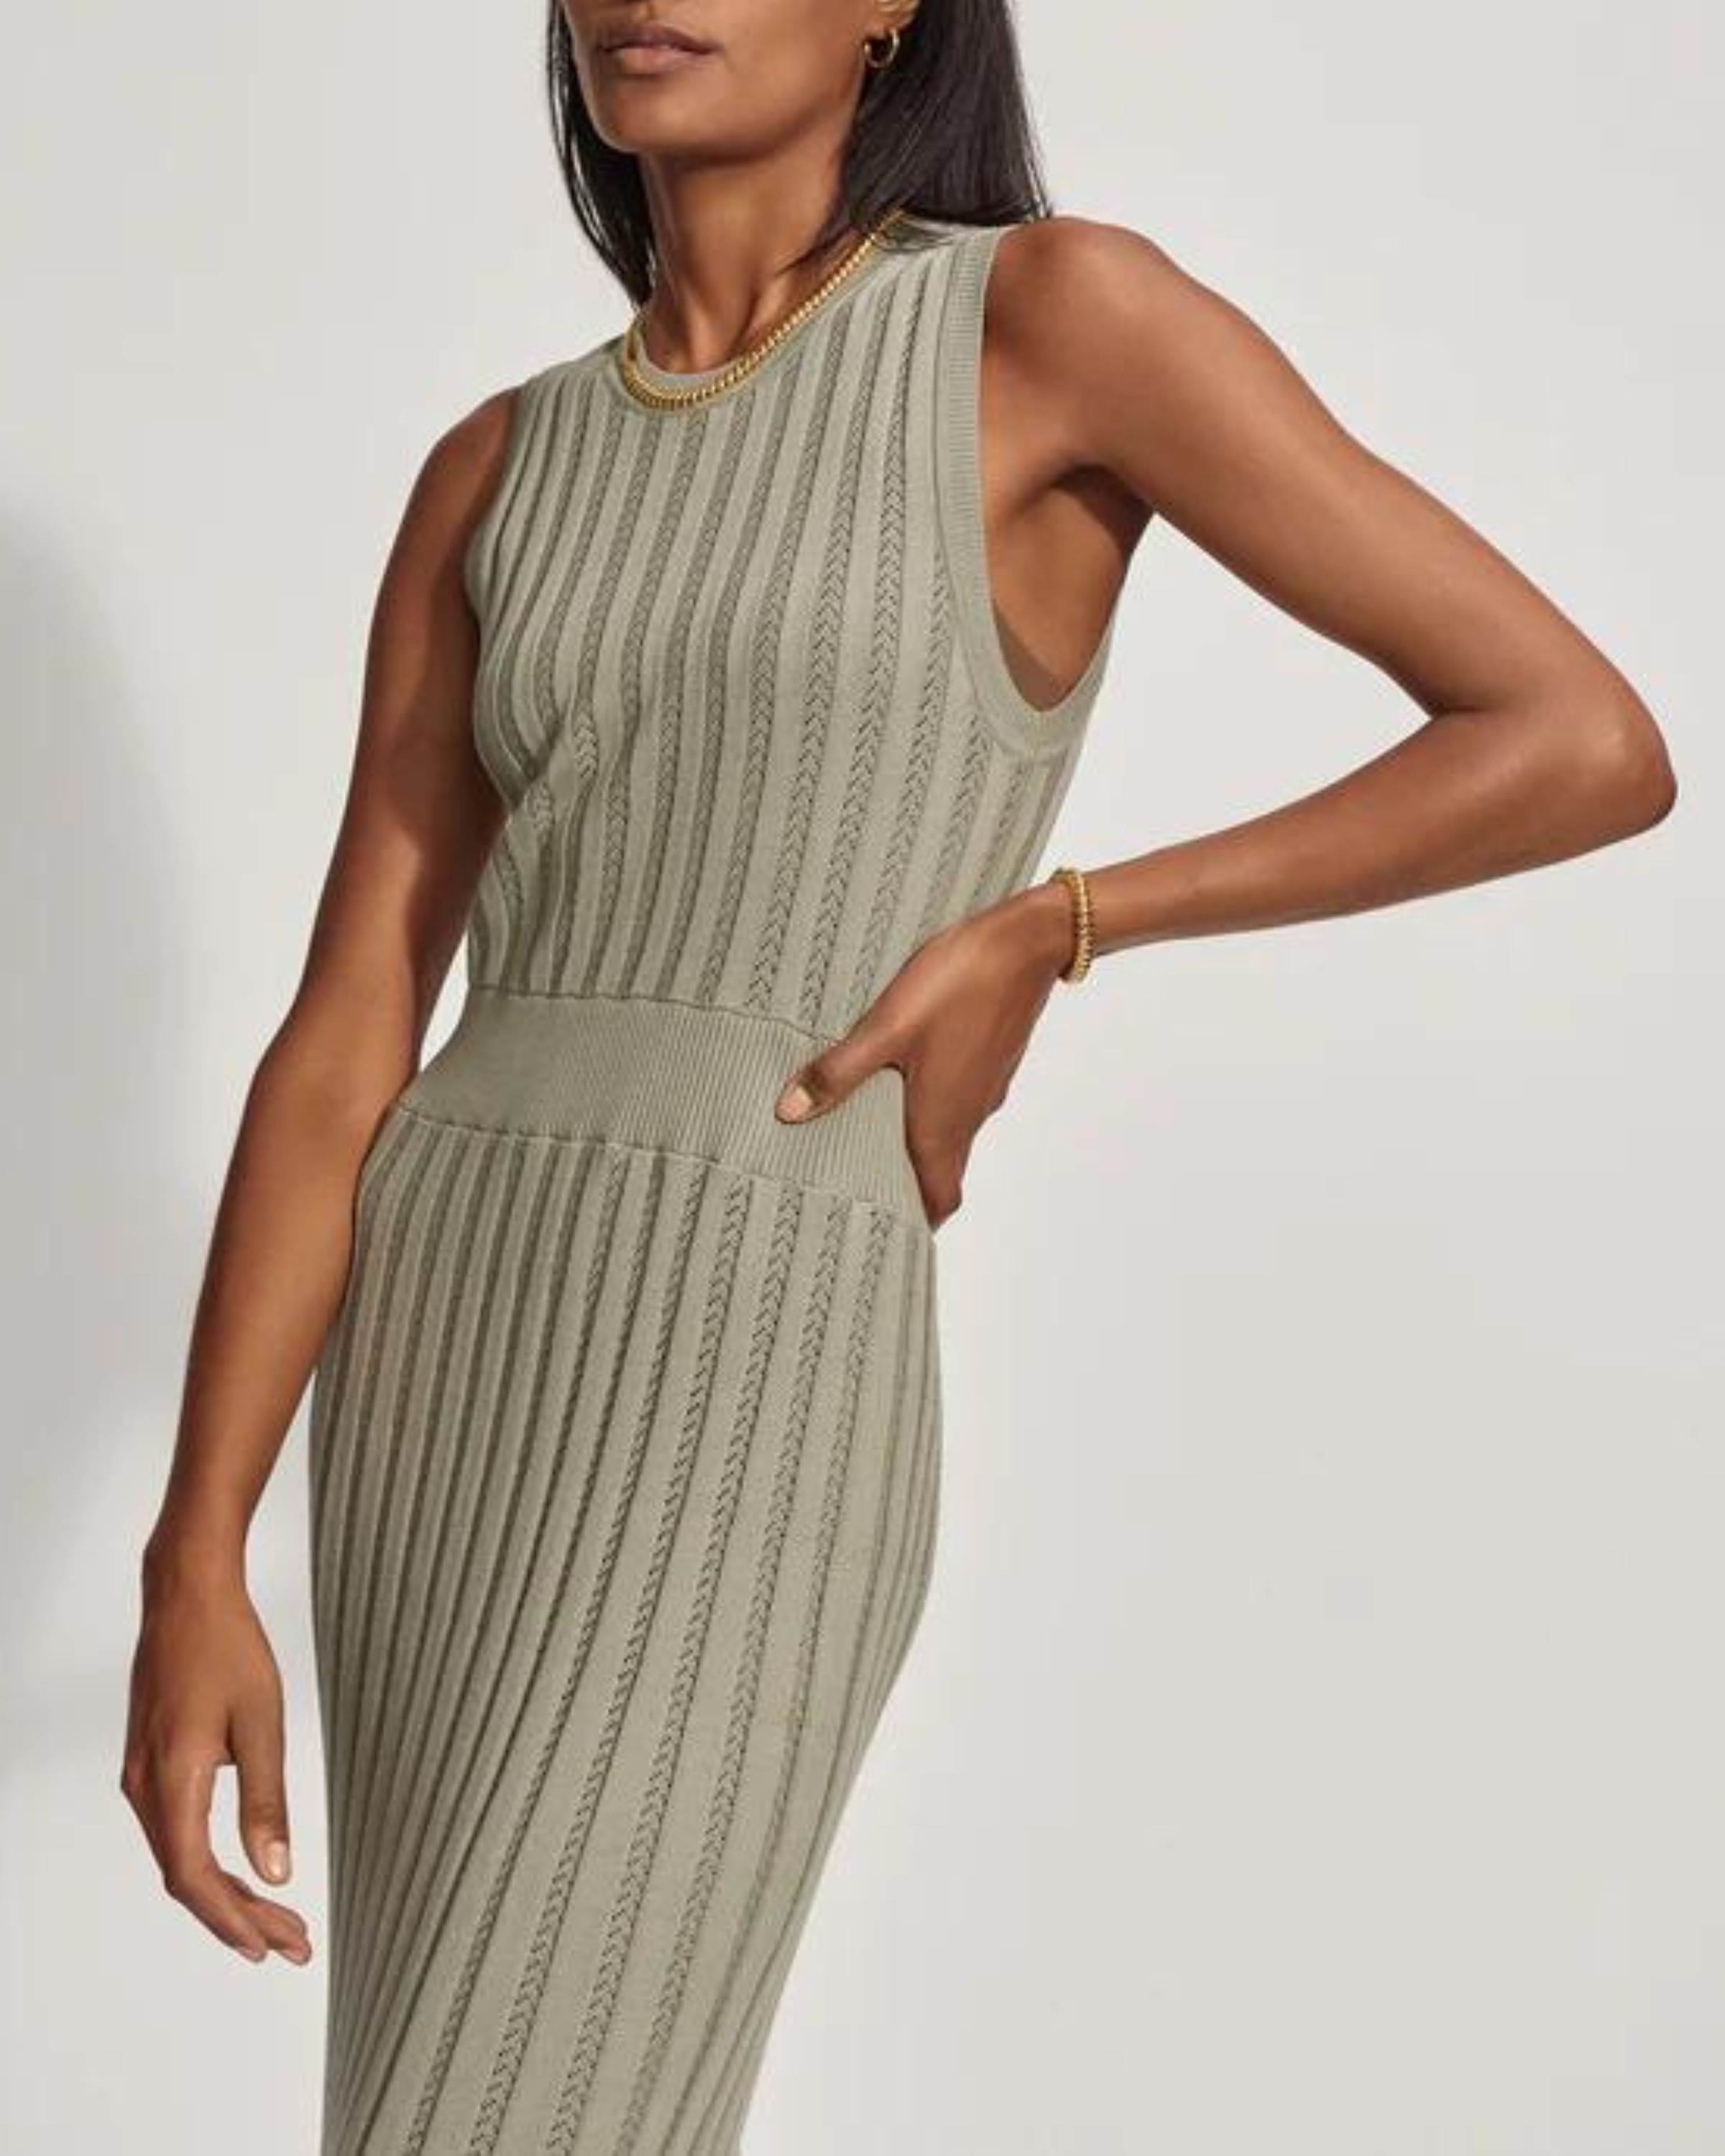 Varley Florian Knit Dress in Seagrass